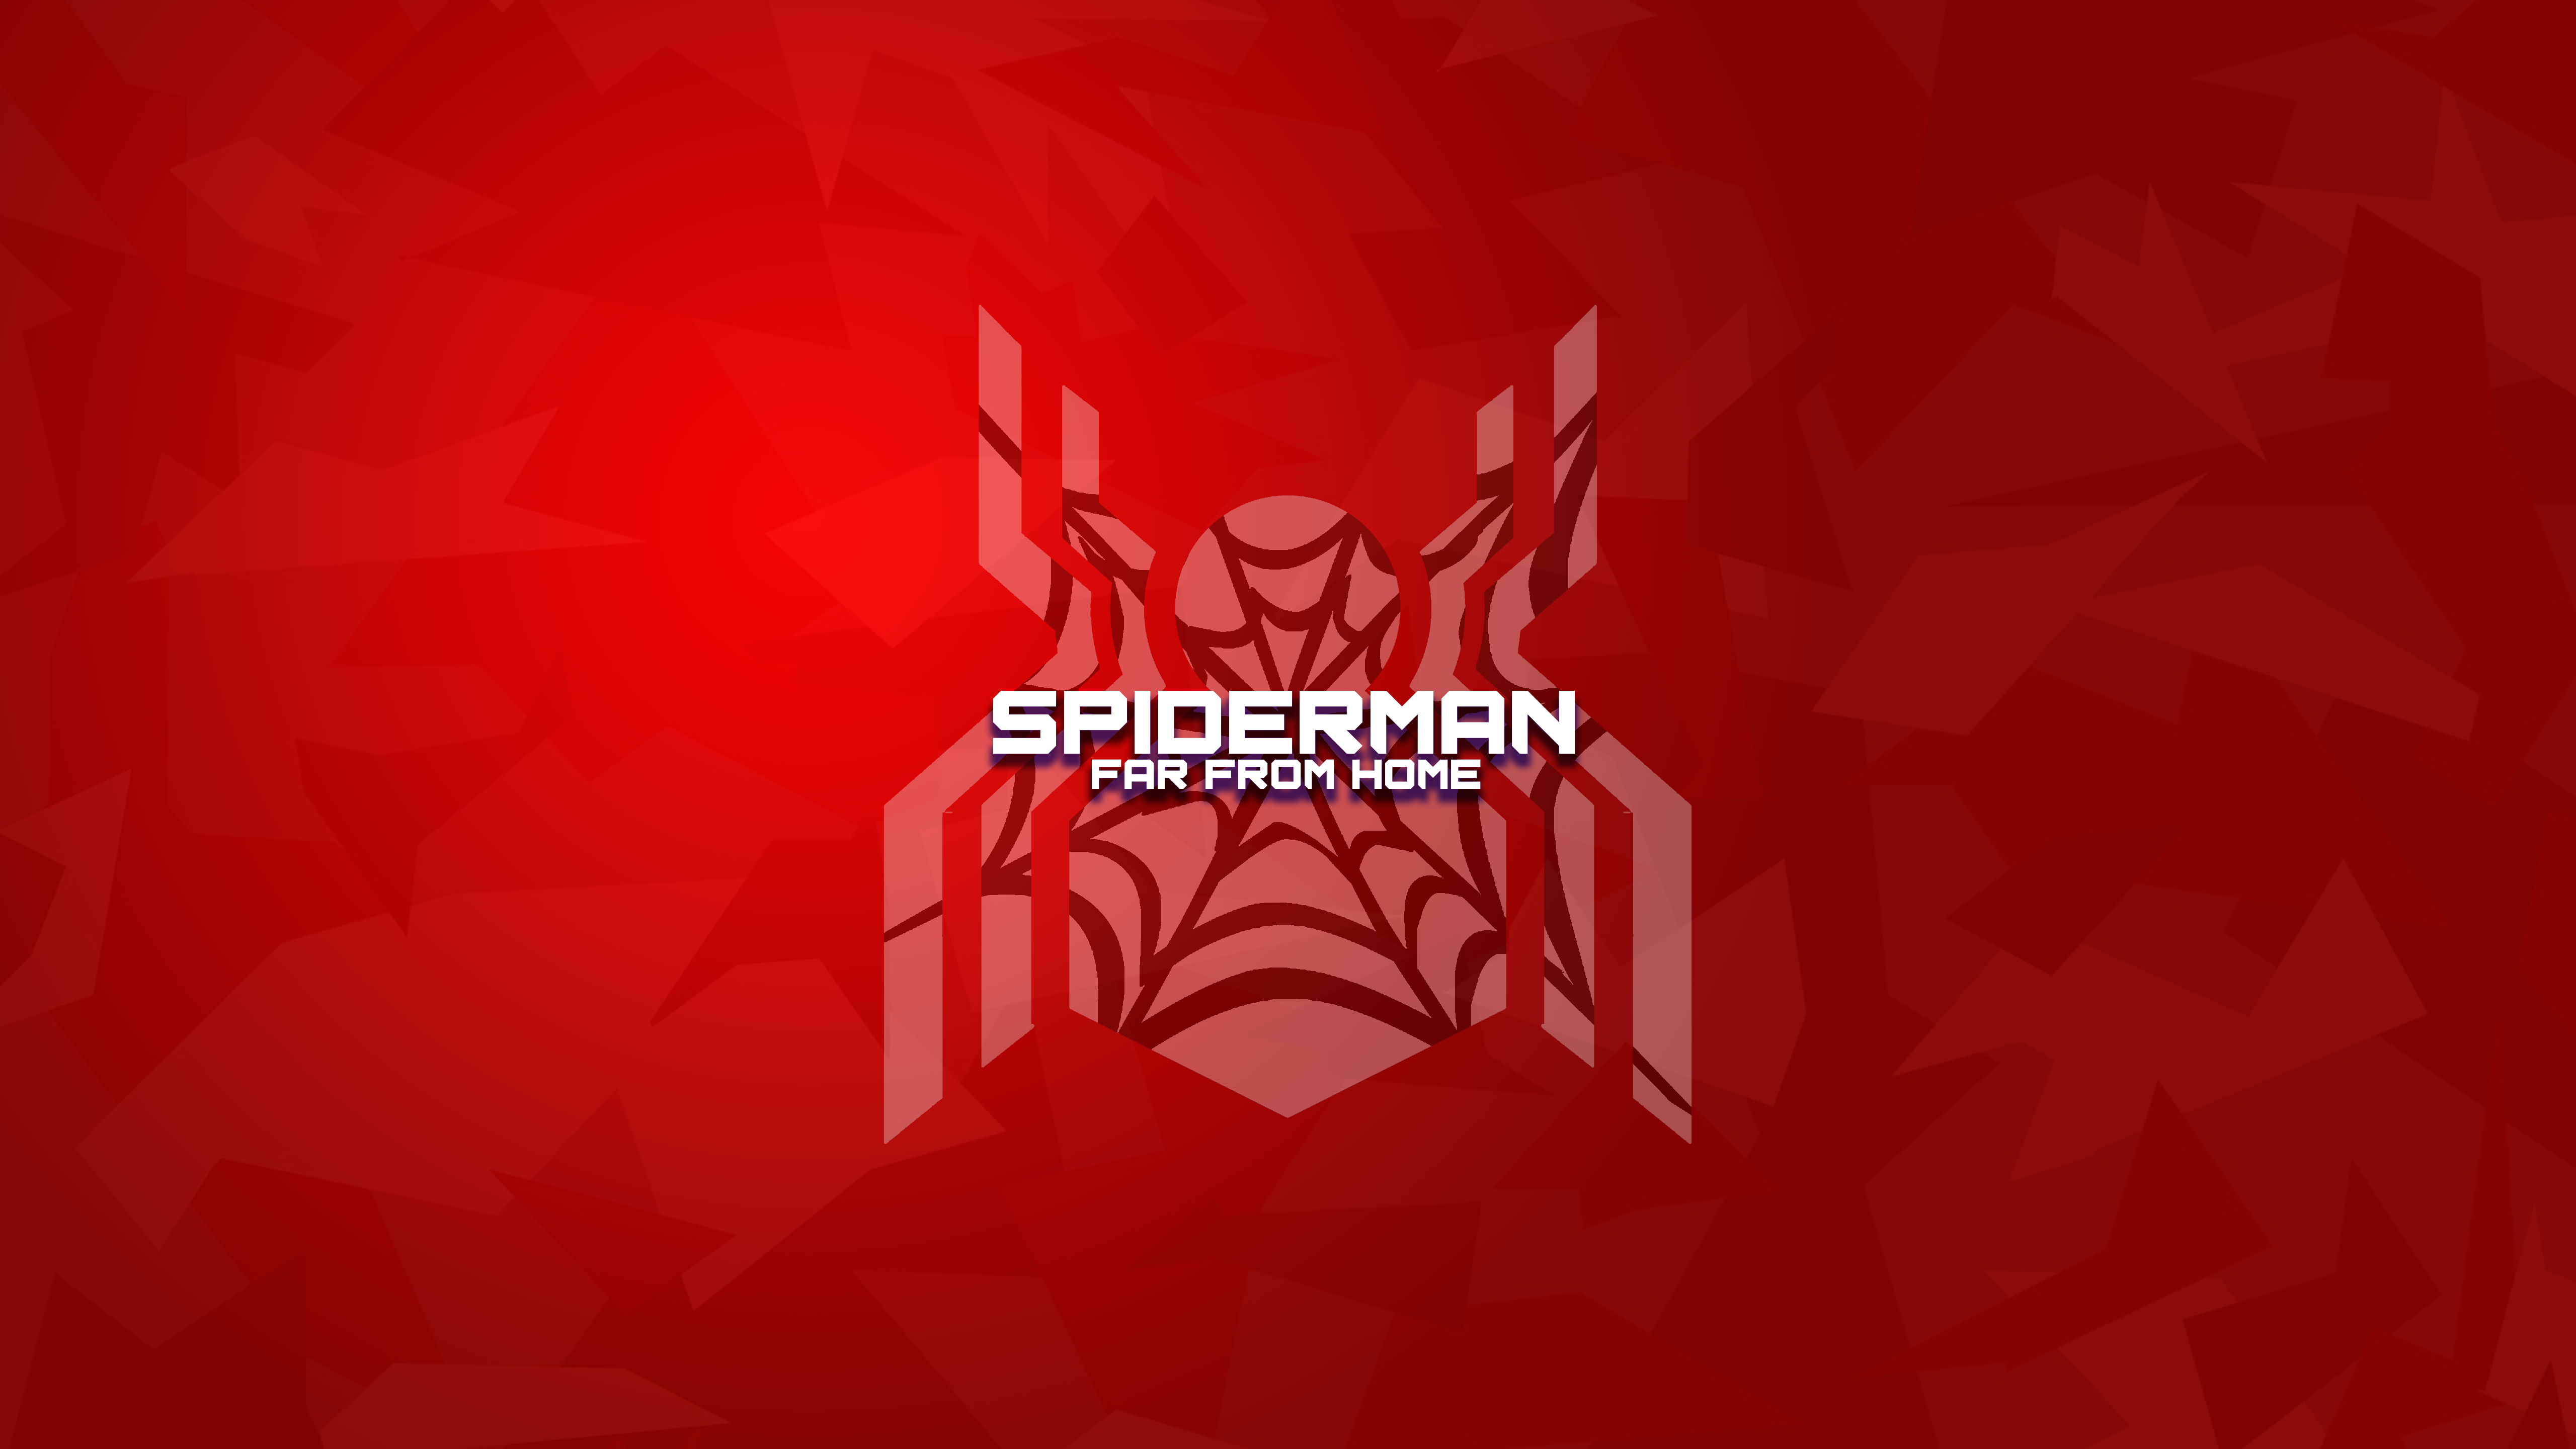 Spider-Man: Far From Home for windows download free